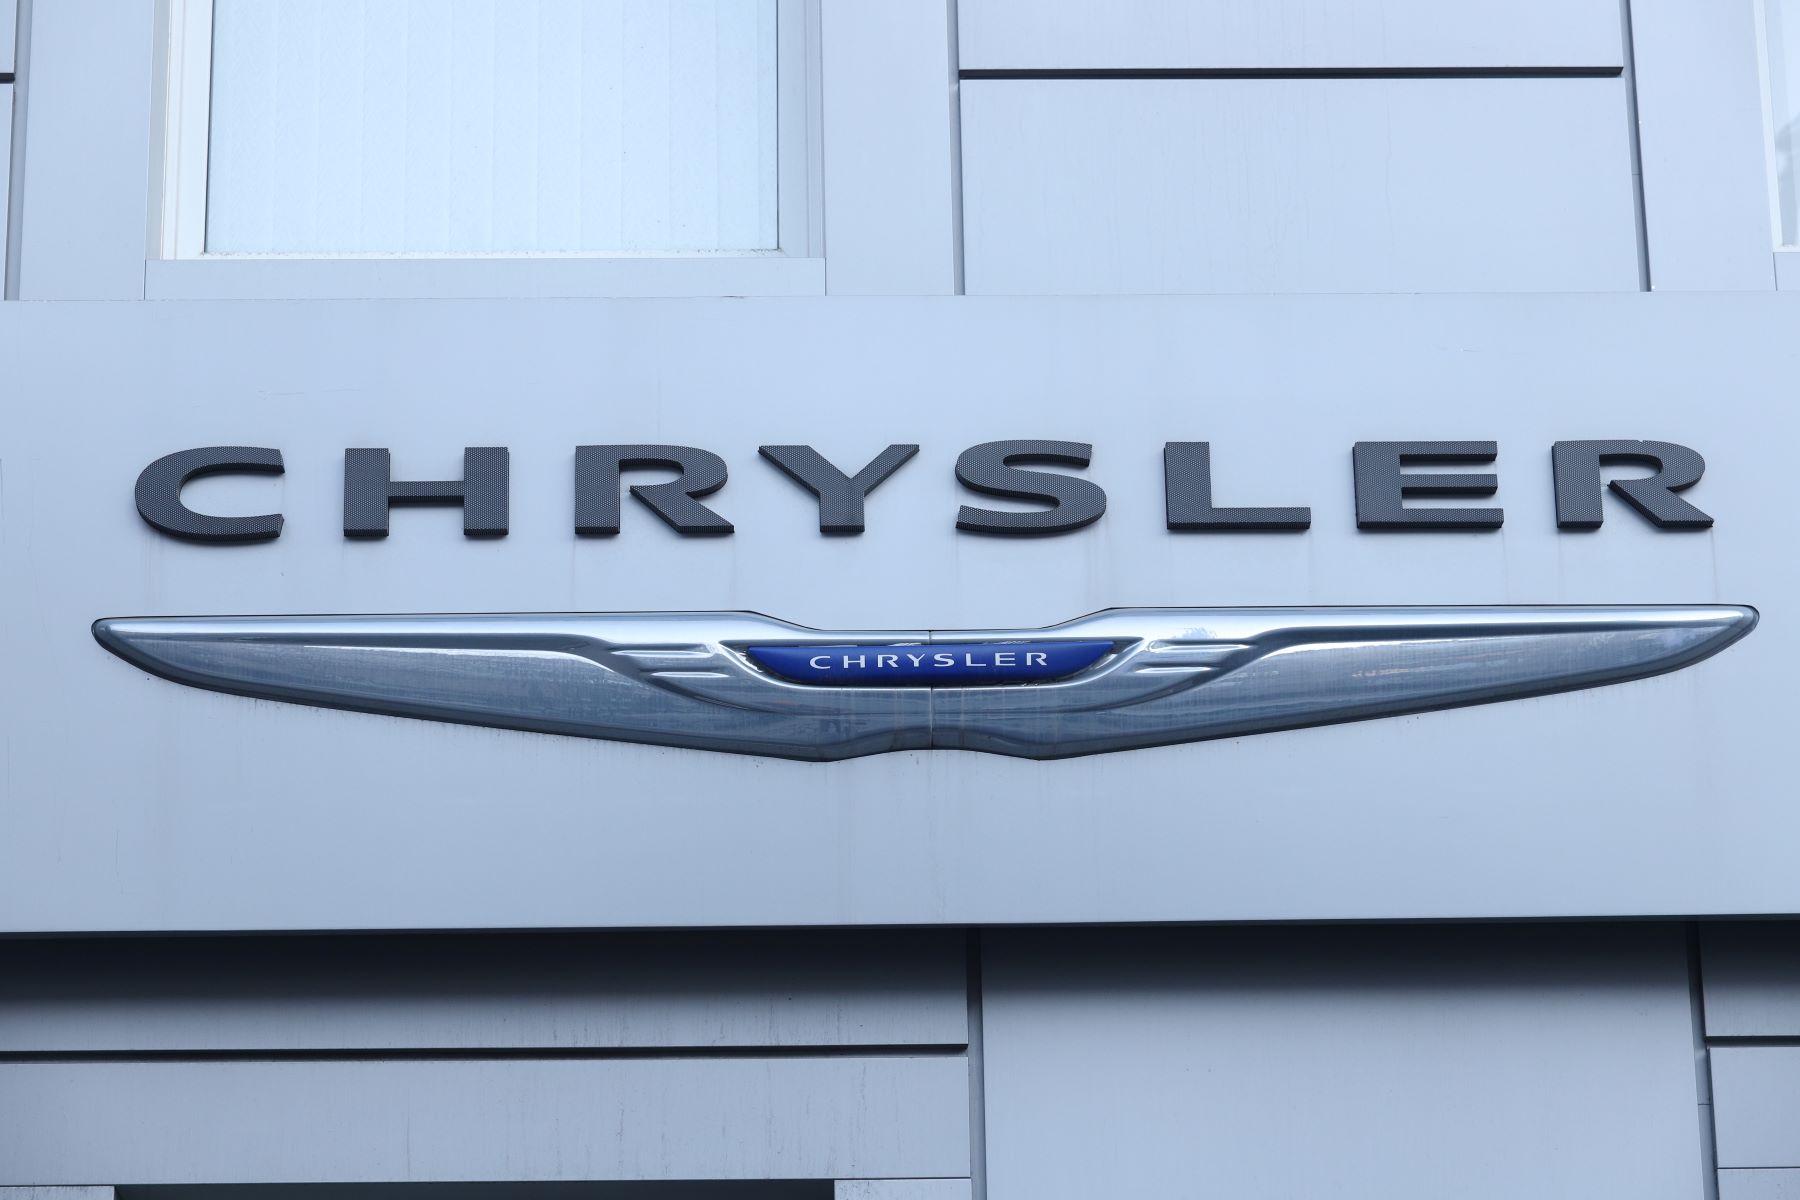 The Chrysler logo on a dealership in Saint-Petersburg, Russia